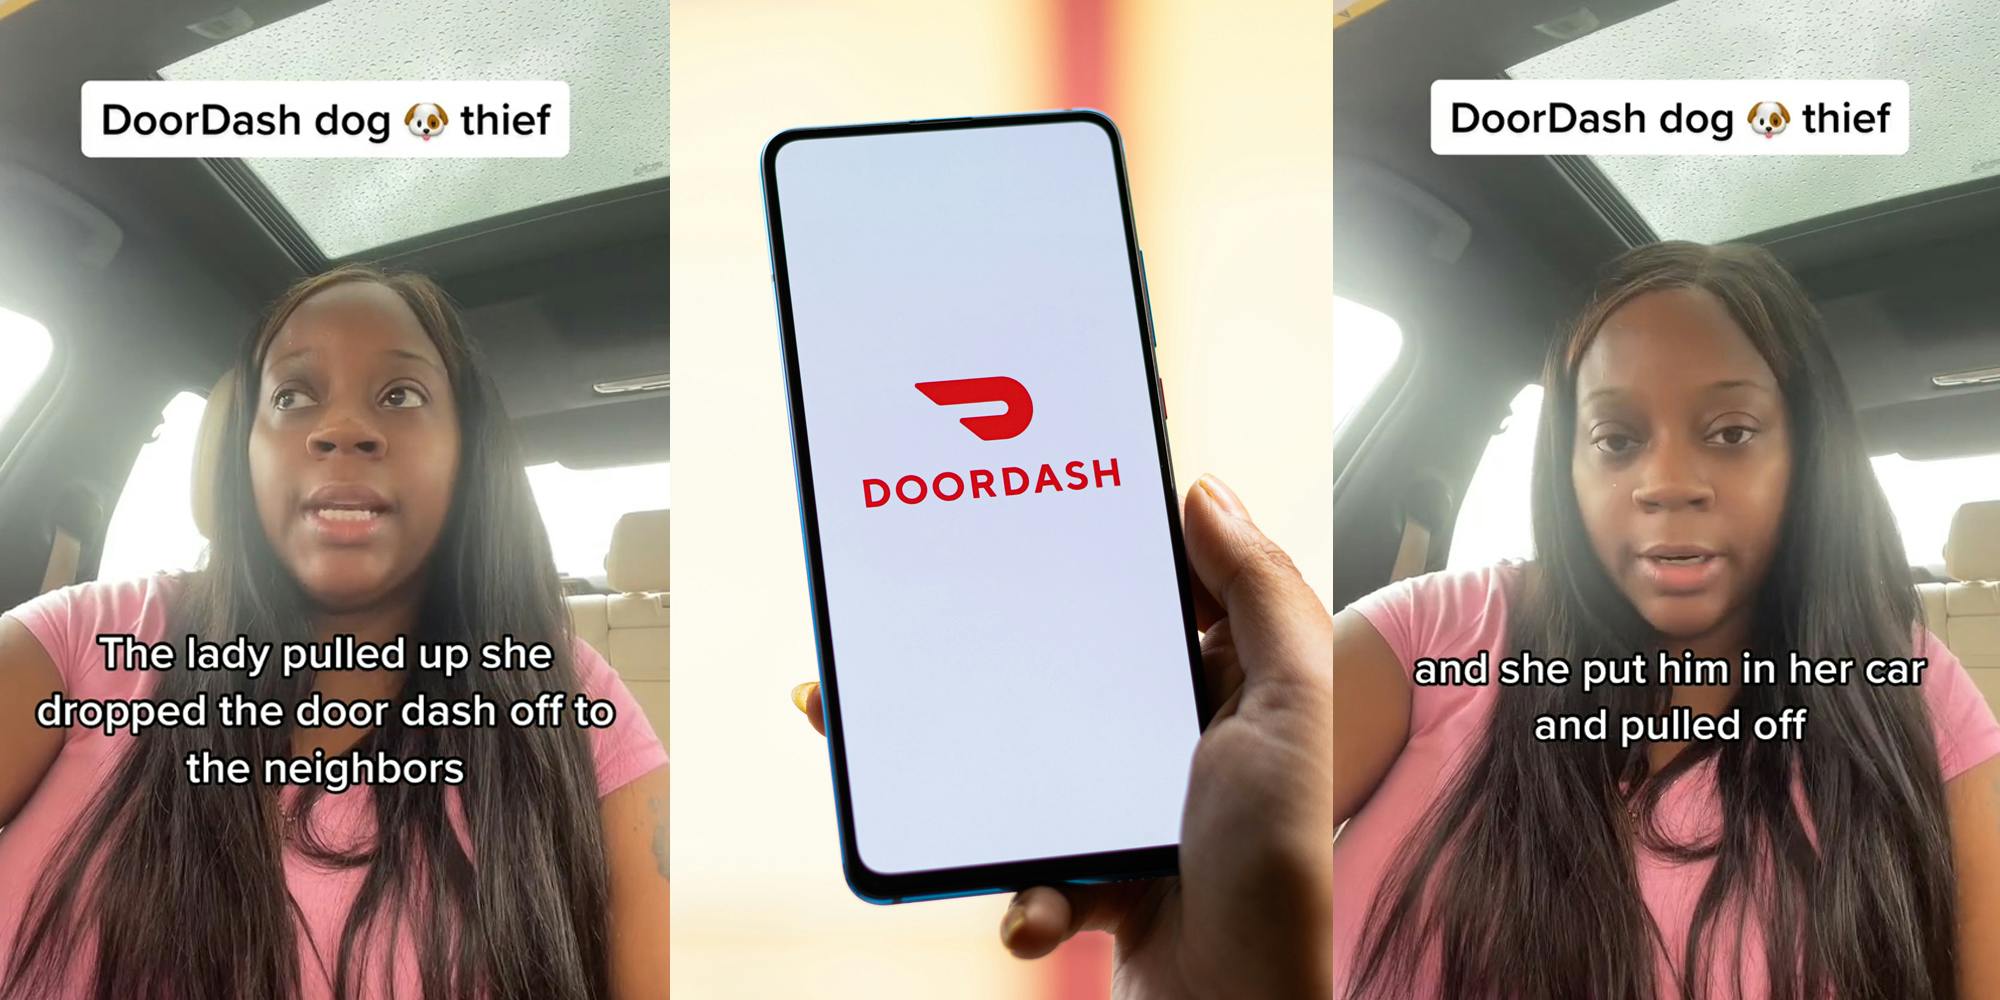 woman speaking in car caption "DoorDash dog thief" "The lady pulled up she dropped the door dash off to the neighbors" (l) hand holding phone with DoorDash on screen in front of light yellow background (c) woman speaking in car caption "DoorDash dog thief" "and she put him in her car and pulled off" (r)